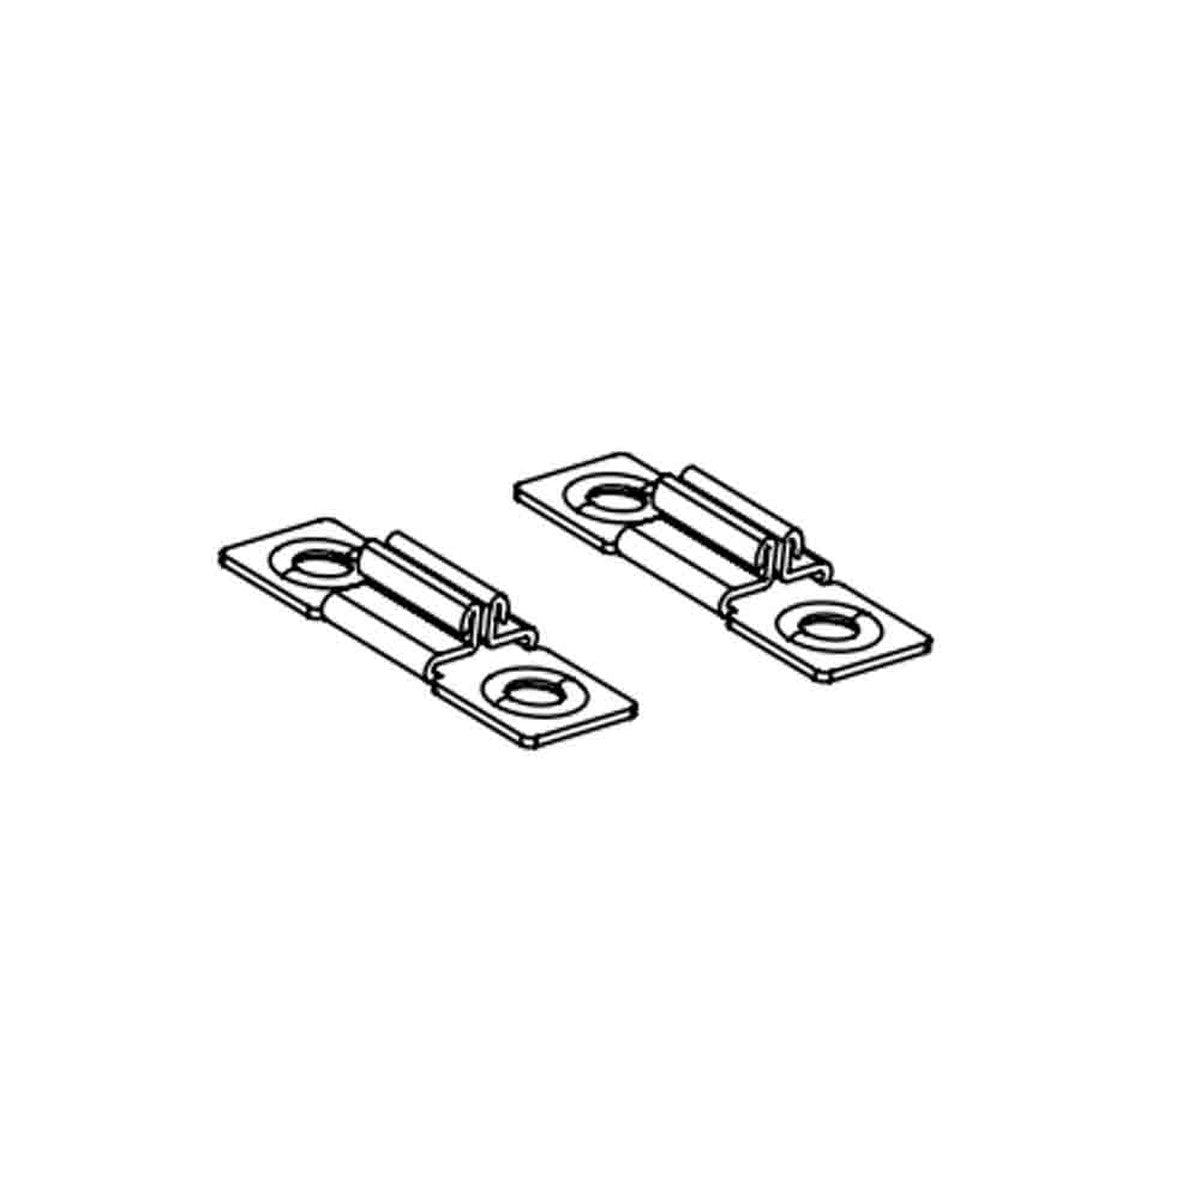 Chromapath Standard Mounting Clips for Square, 45°, and DUO Channels, Pack of 2 - Bees Lighting